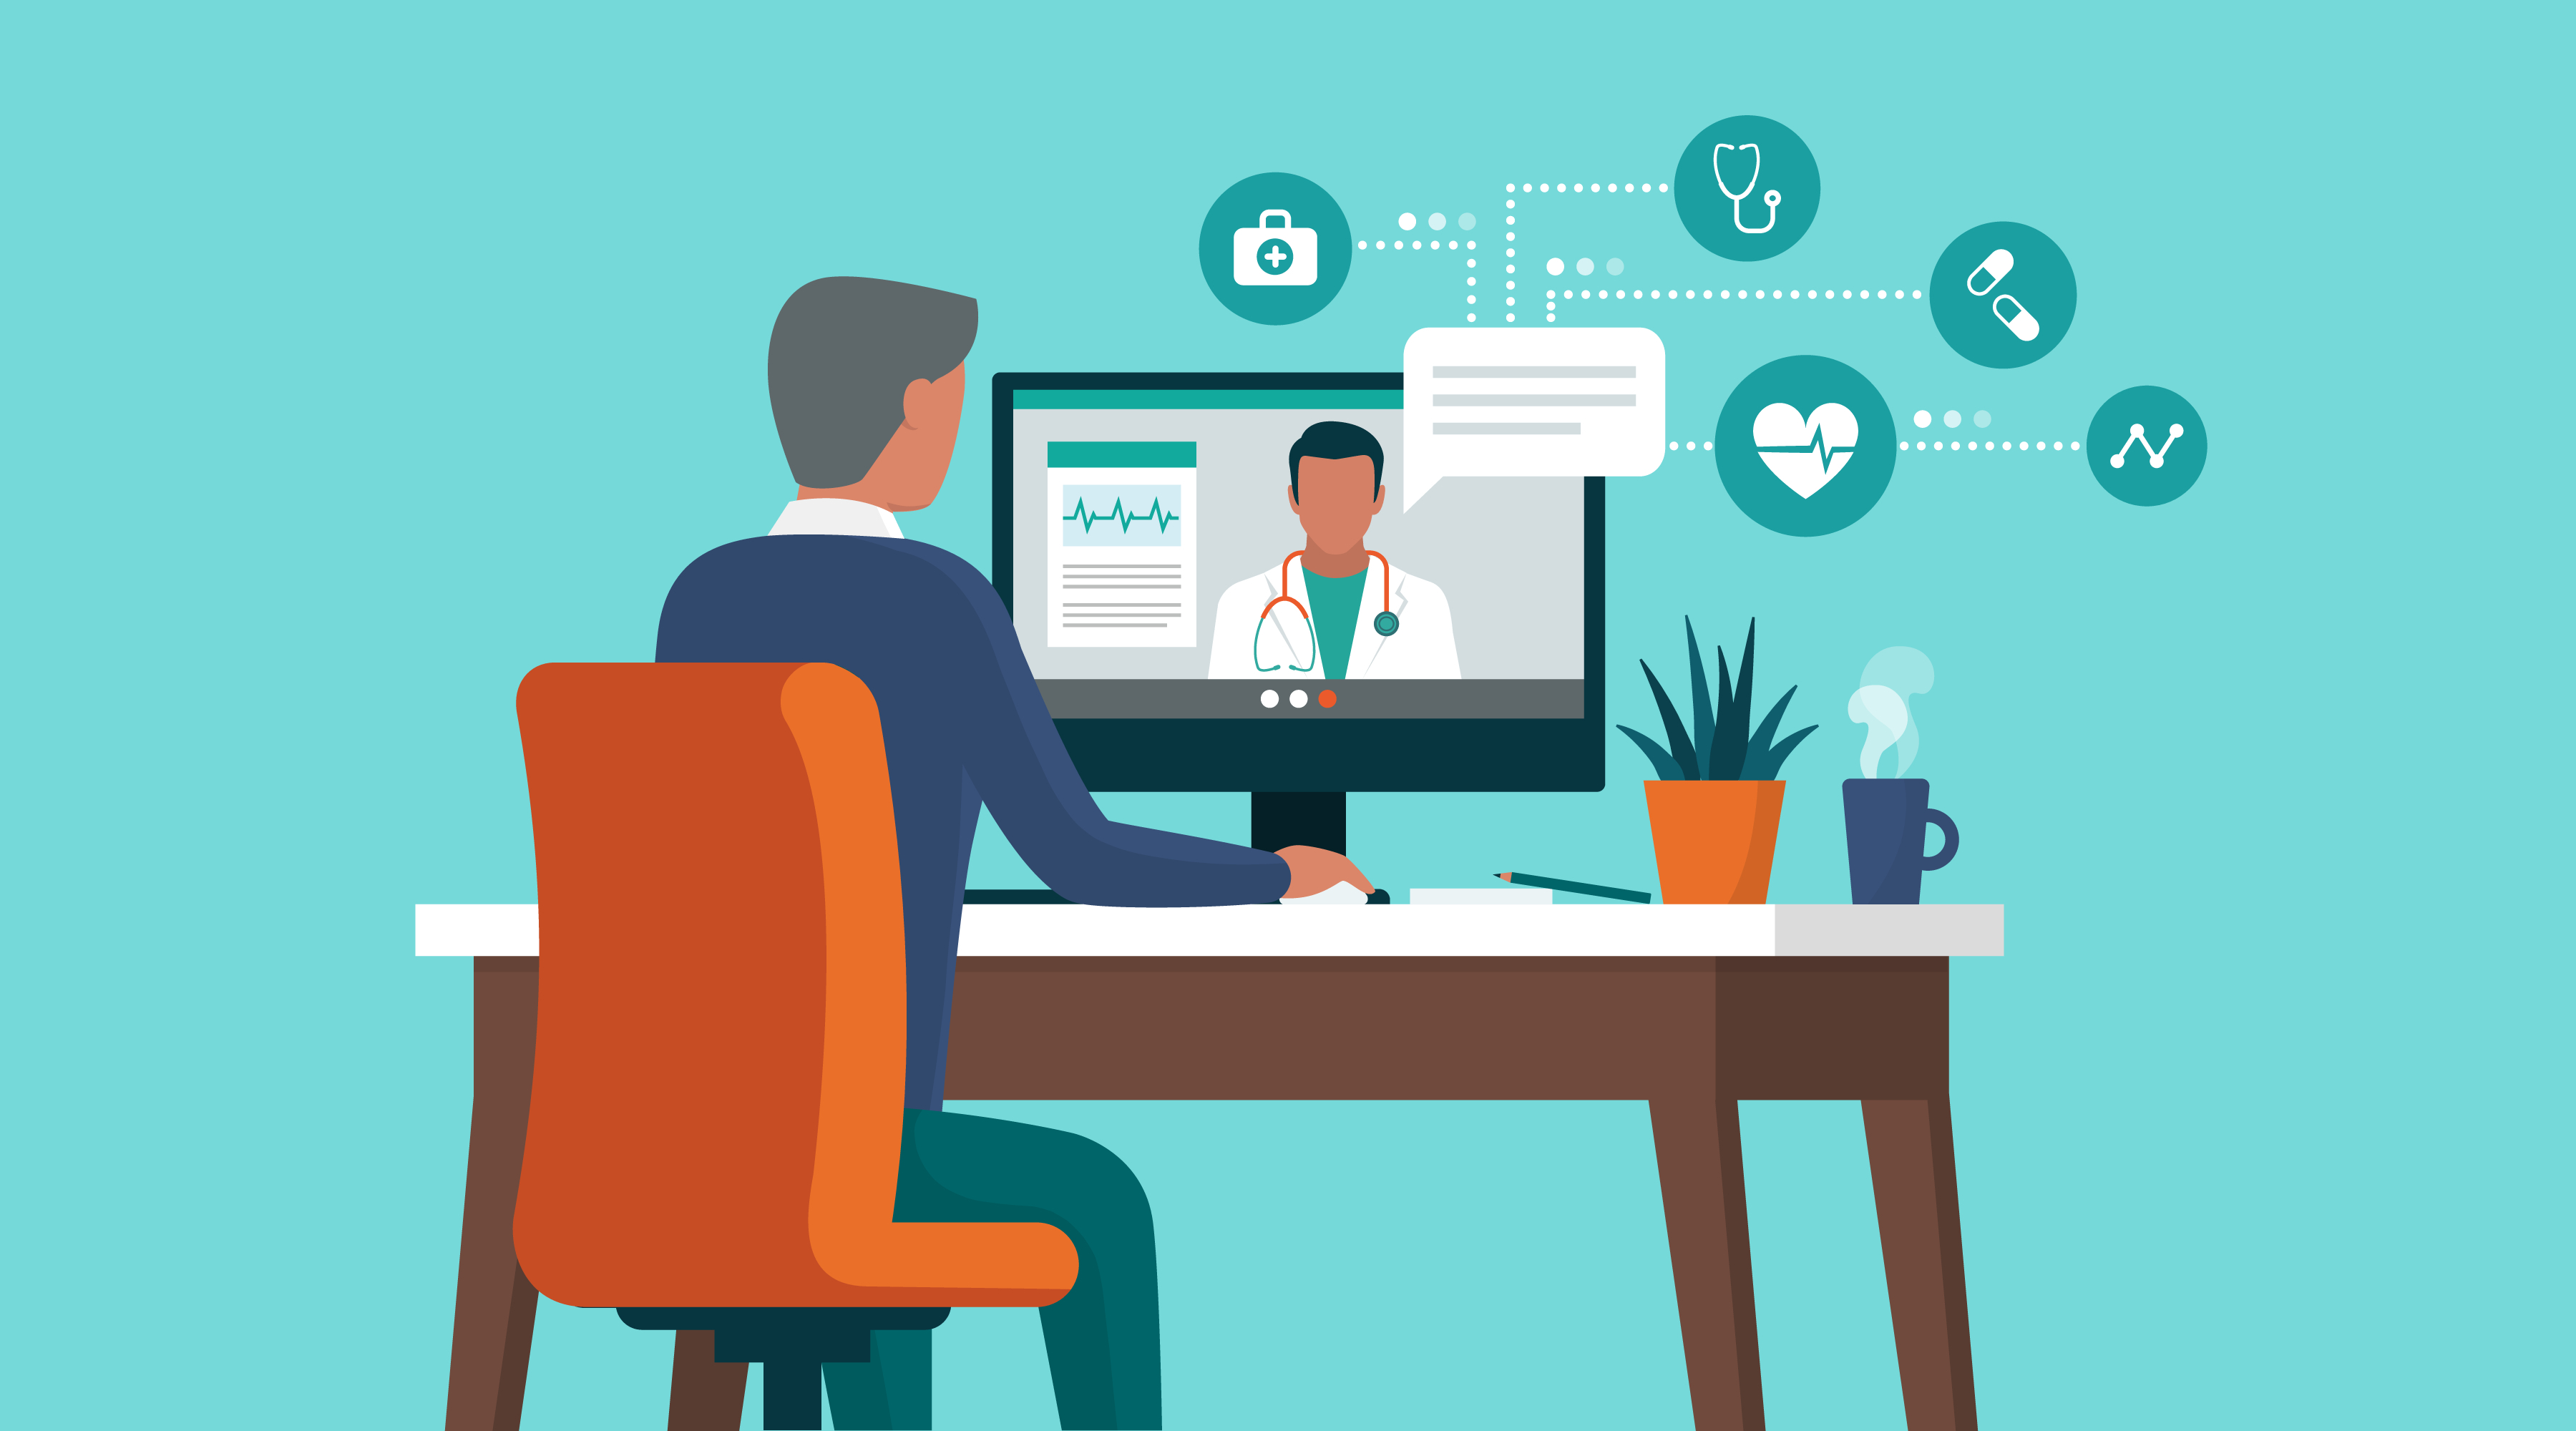 Illustration of a patient meeting with a doctor via their desktop computer.